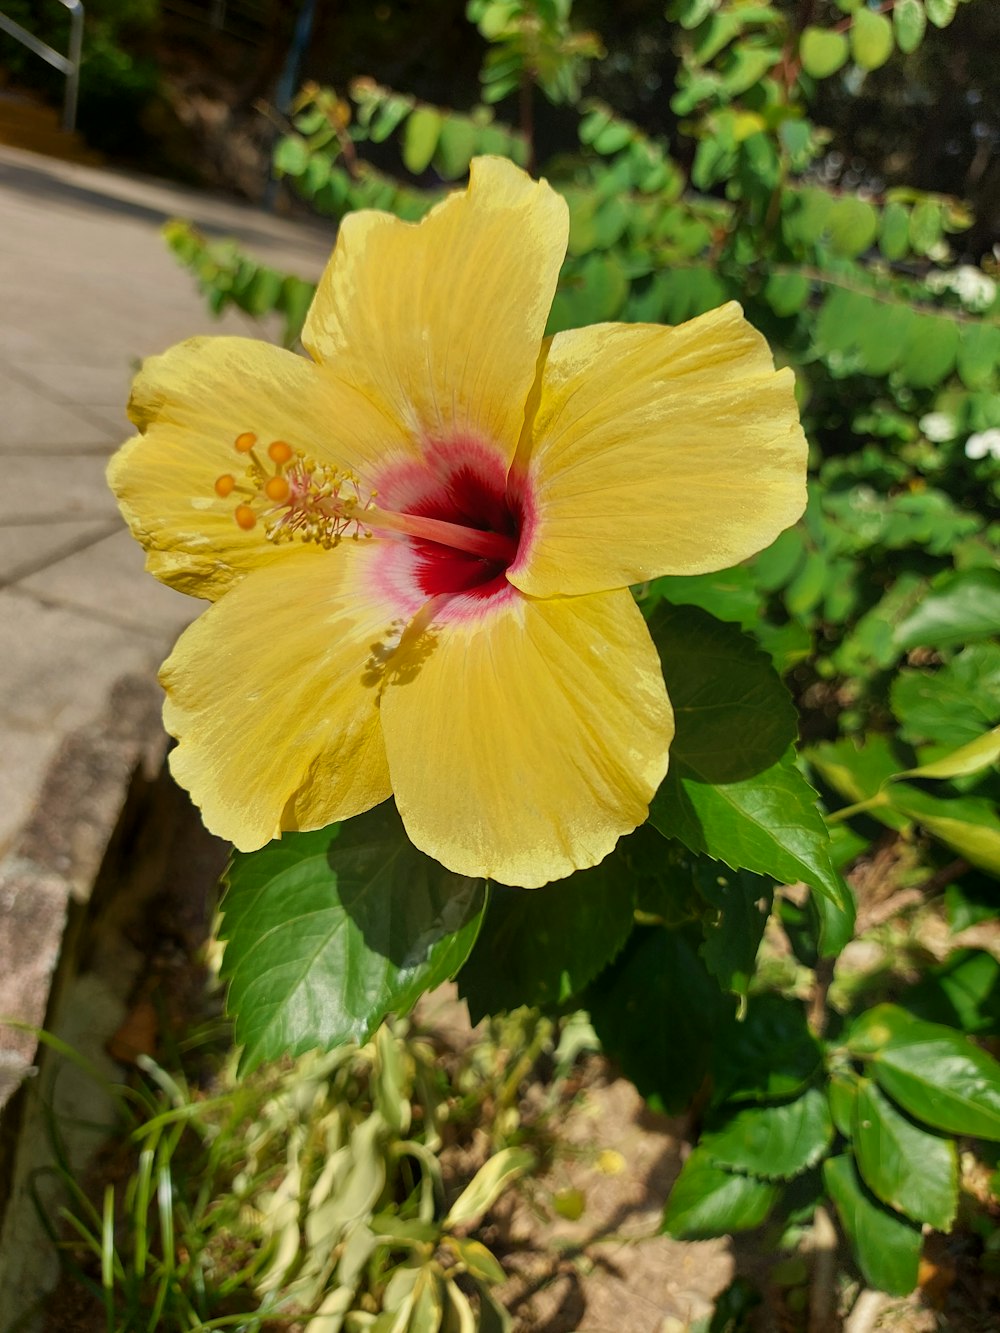 a yellow flower with a red center in a garden